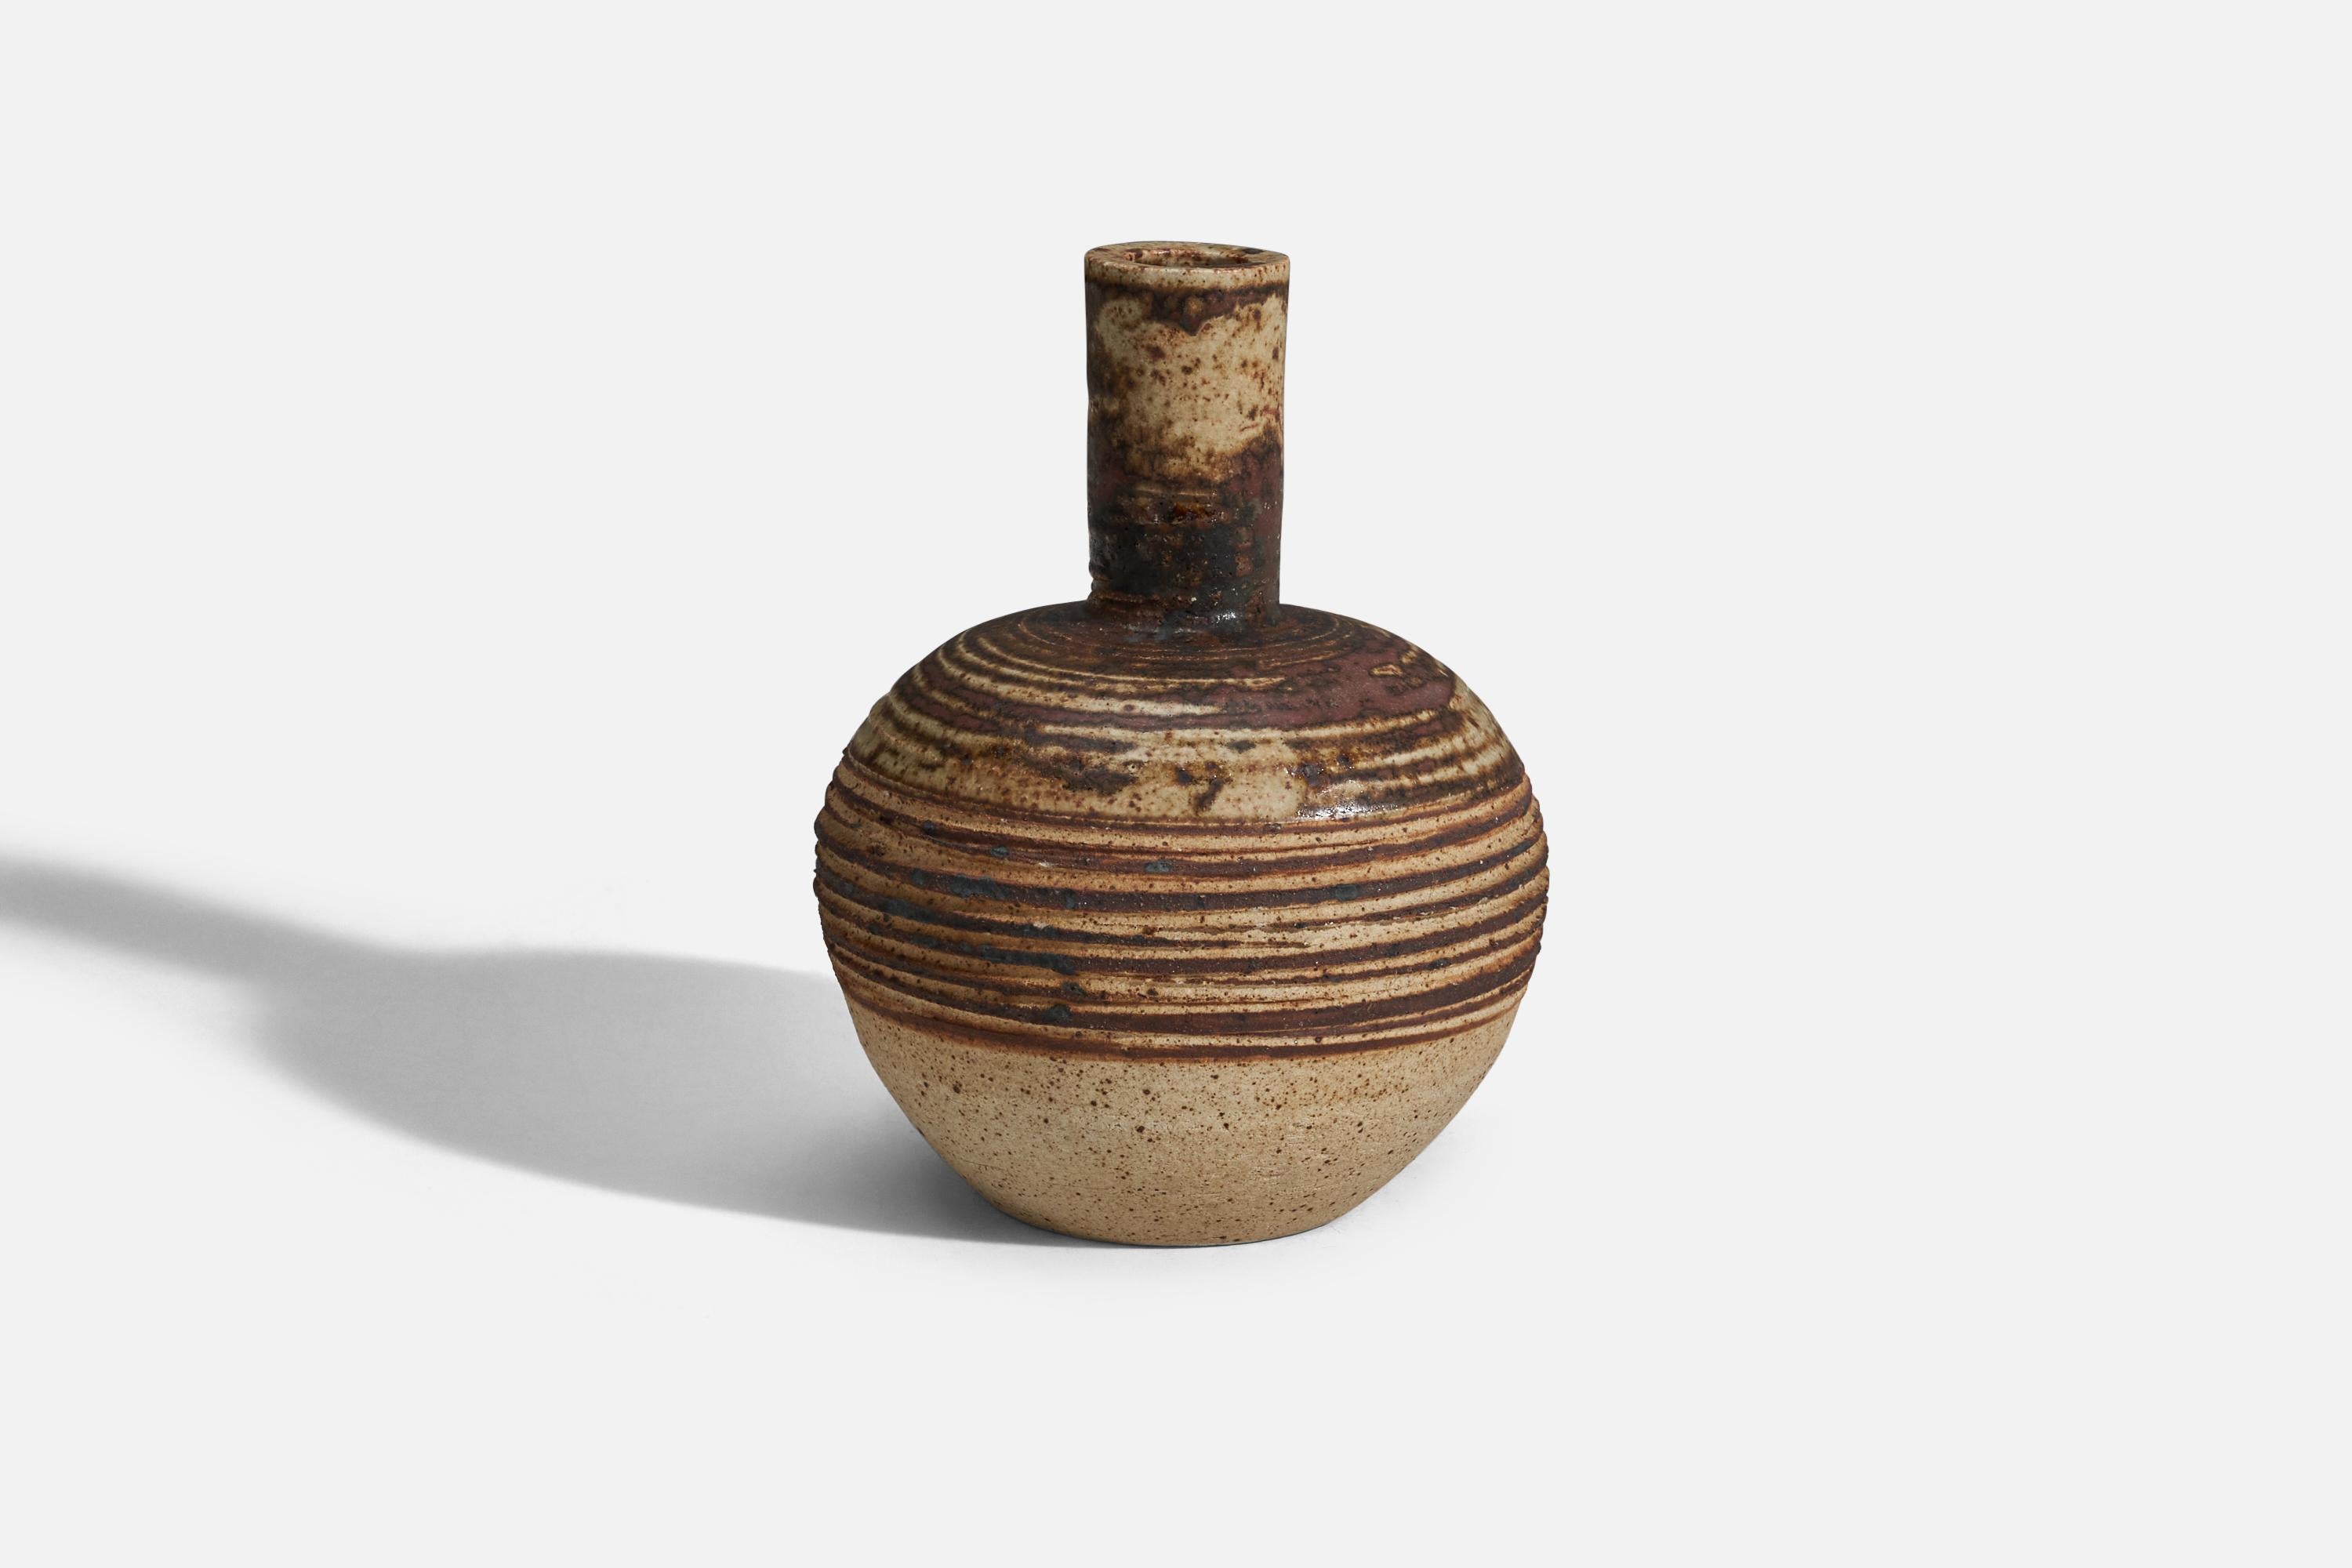 A brown glazed stoneware vase designed and produced by Tue Poulsen, Denmark, 1970s.